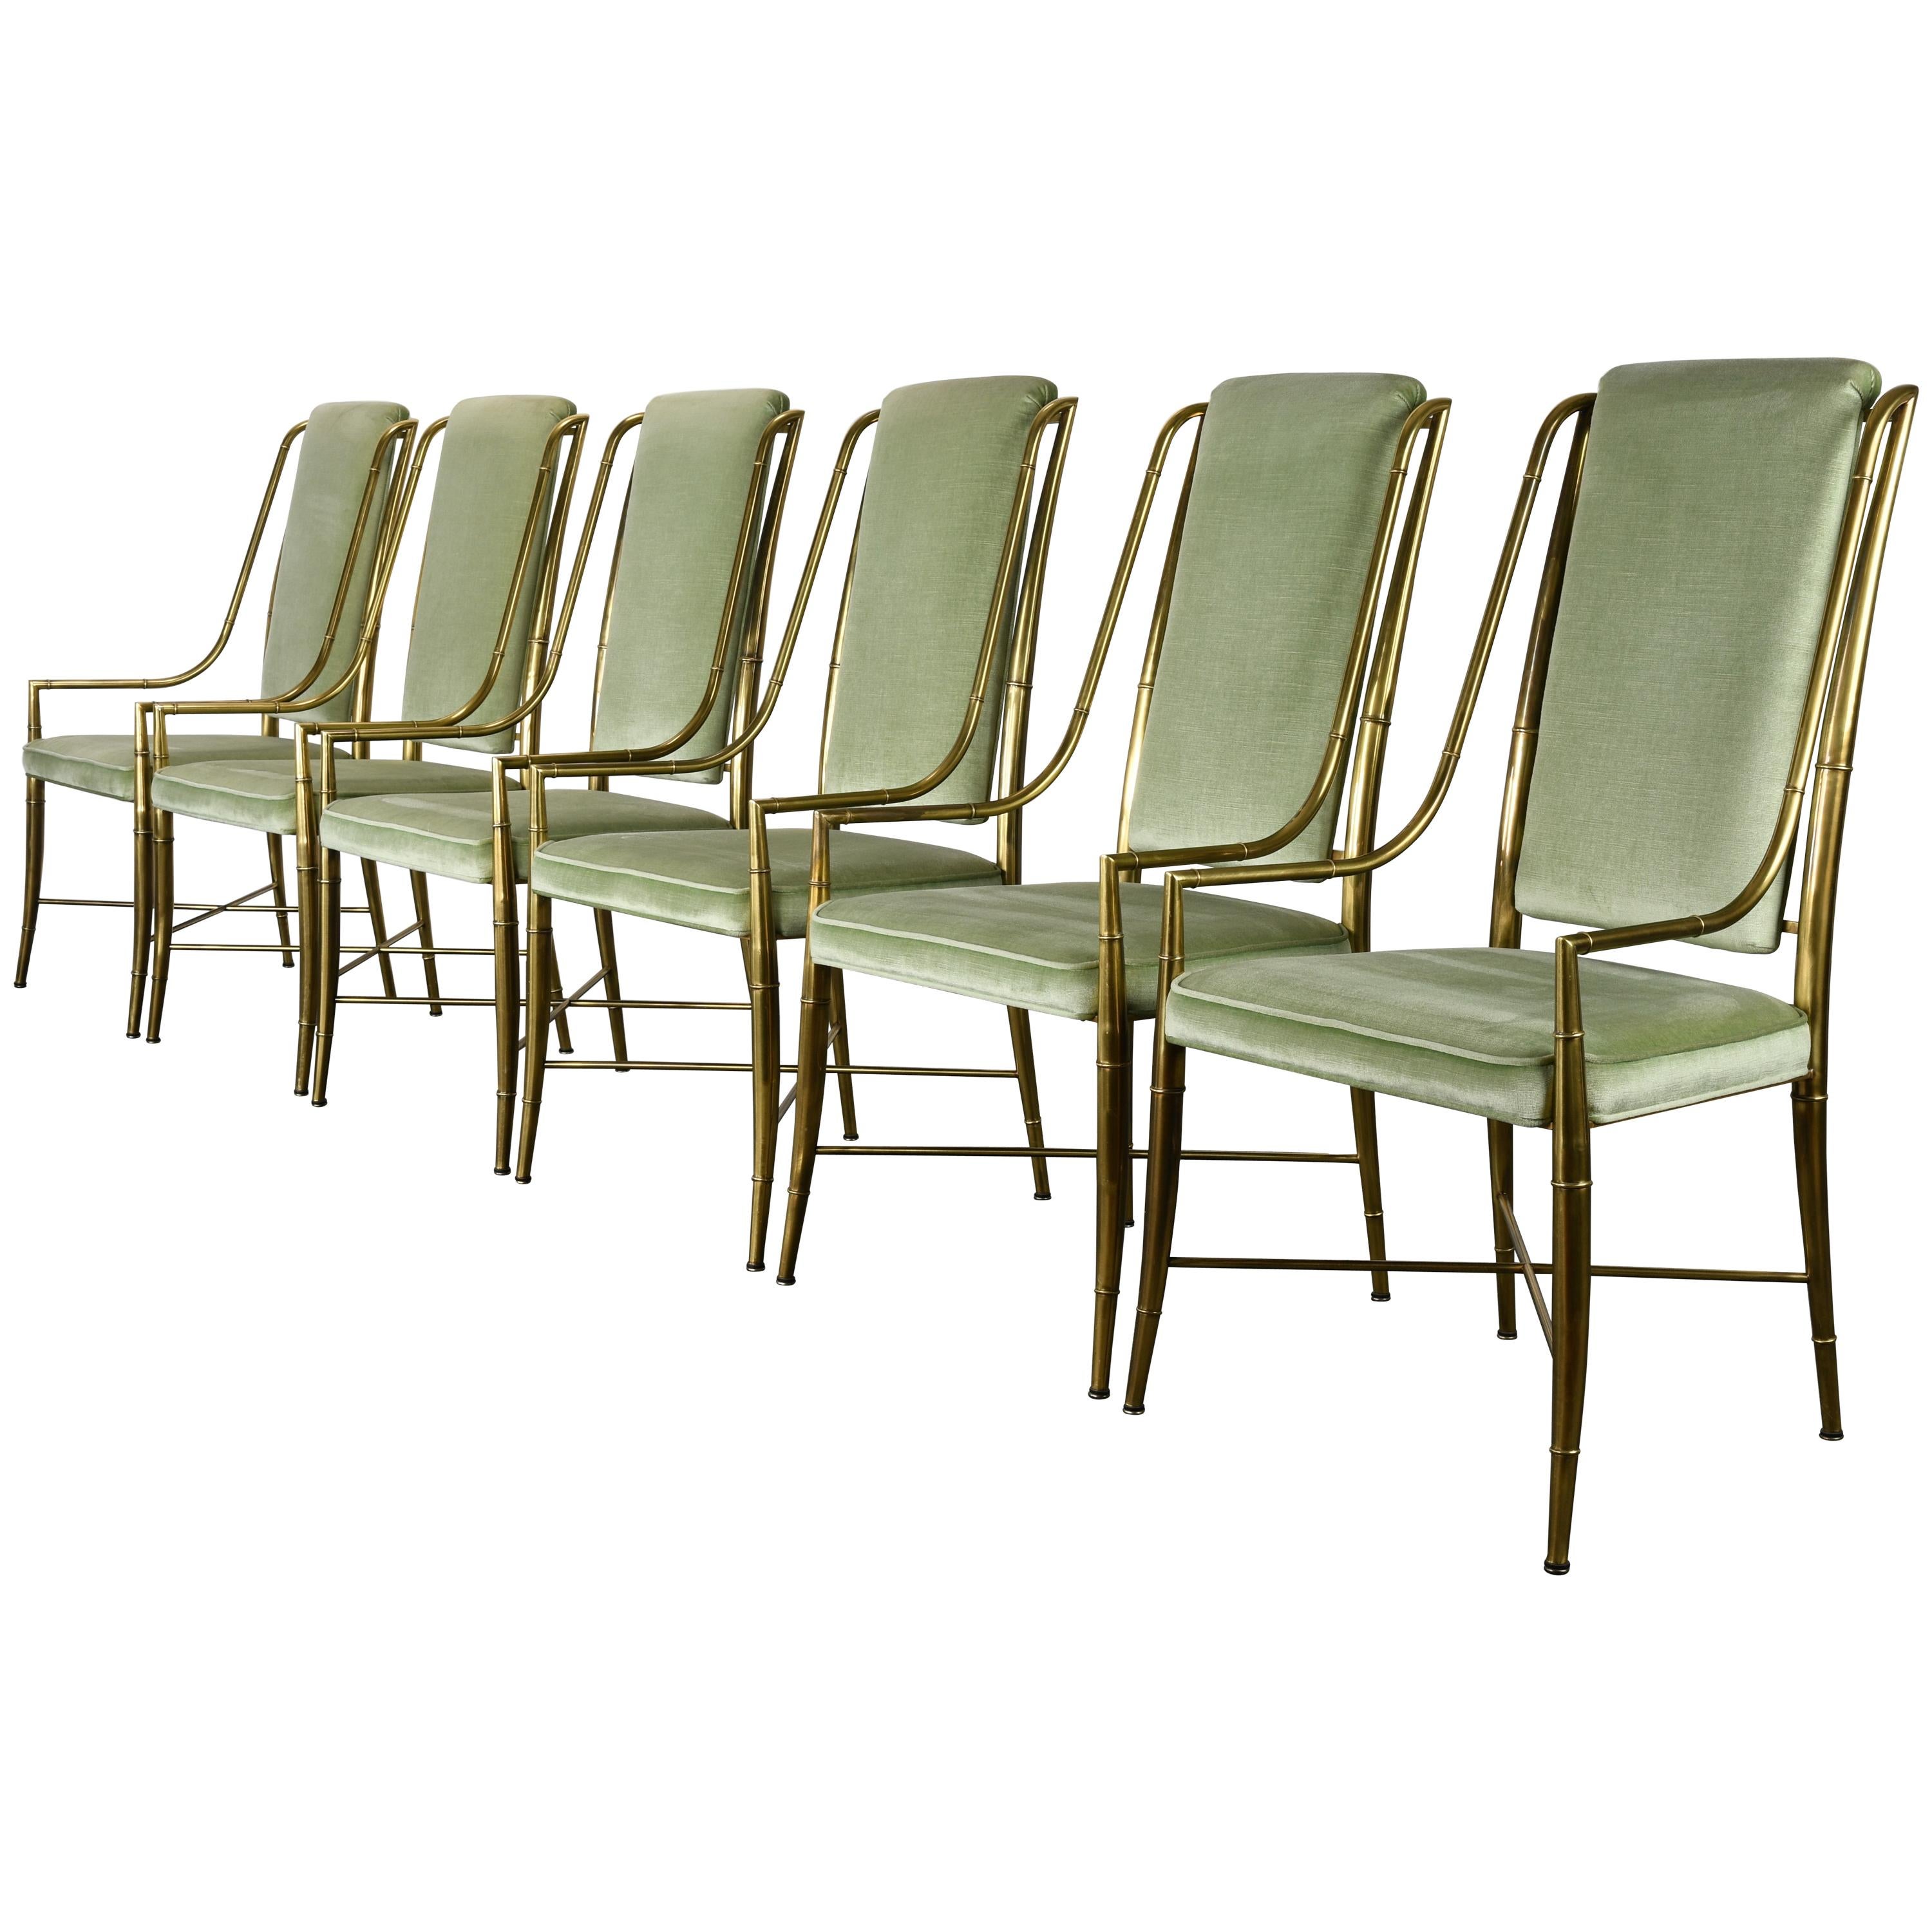 "The Imperial Chair" Set of Six by Weiman/Warren Lloyd for Mastercraft, 1970s